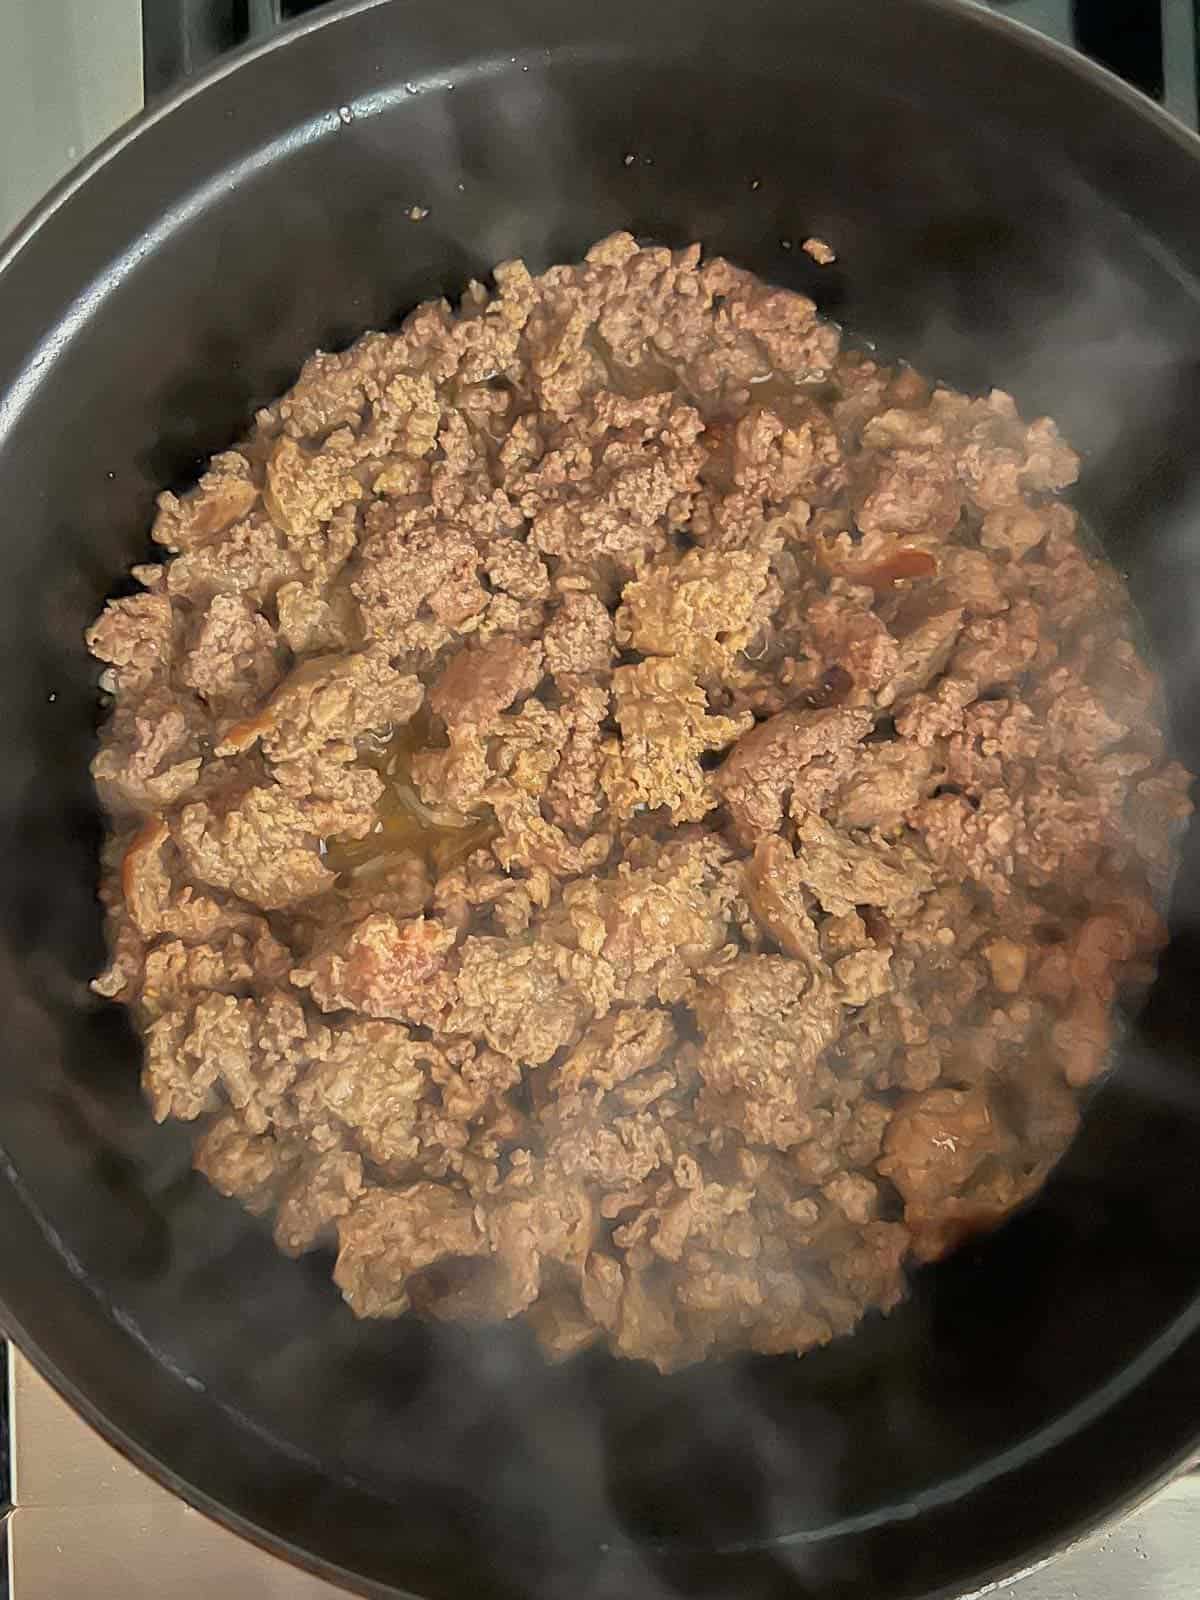 browning ground beef and ground pork in a cast iron dutch oven